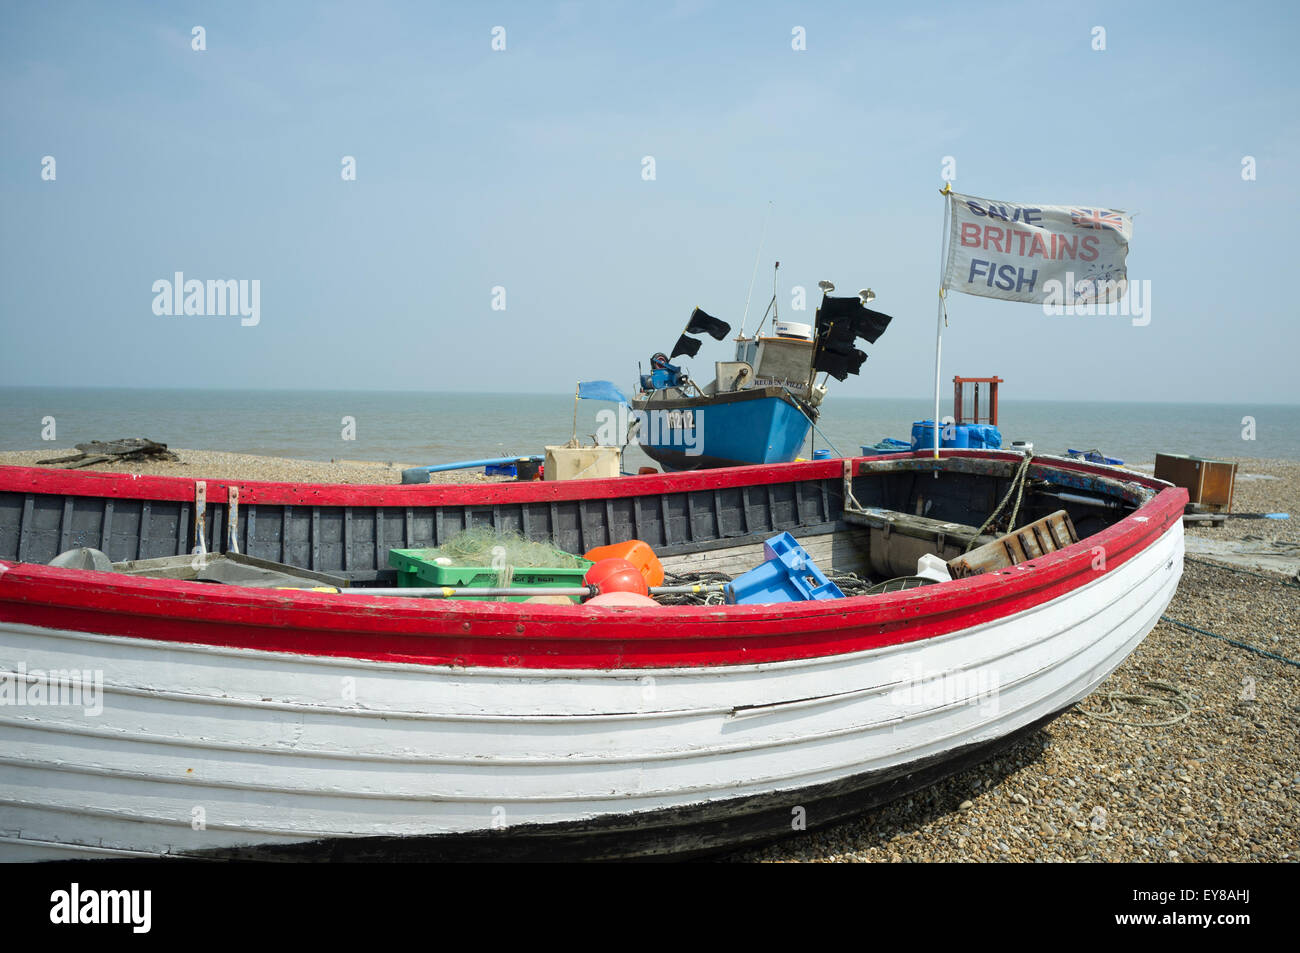 Fishing boats with flag flying with the words 'Save Britains fish', Aldeburgh, Suffolk, UK. Stock Photo